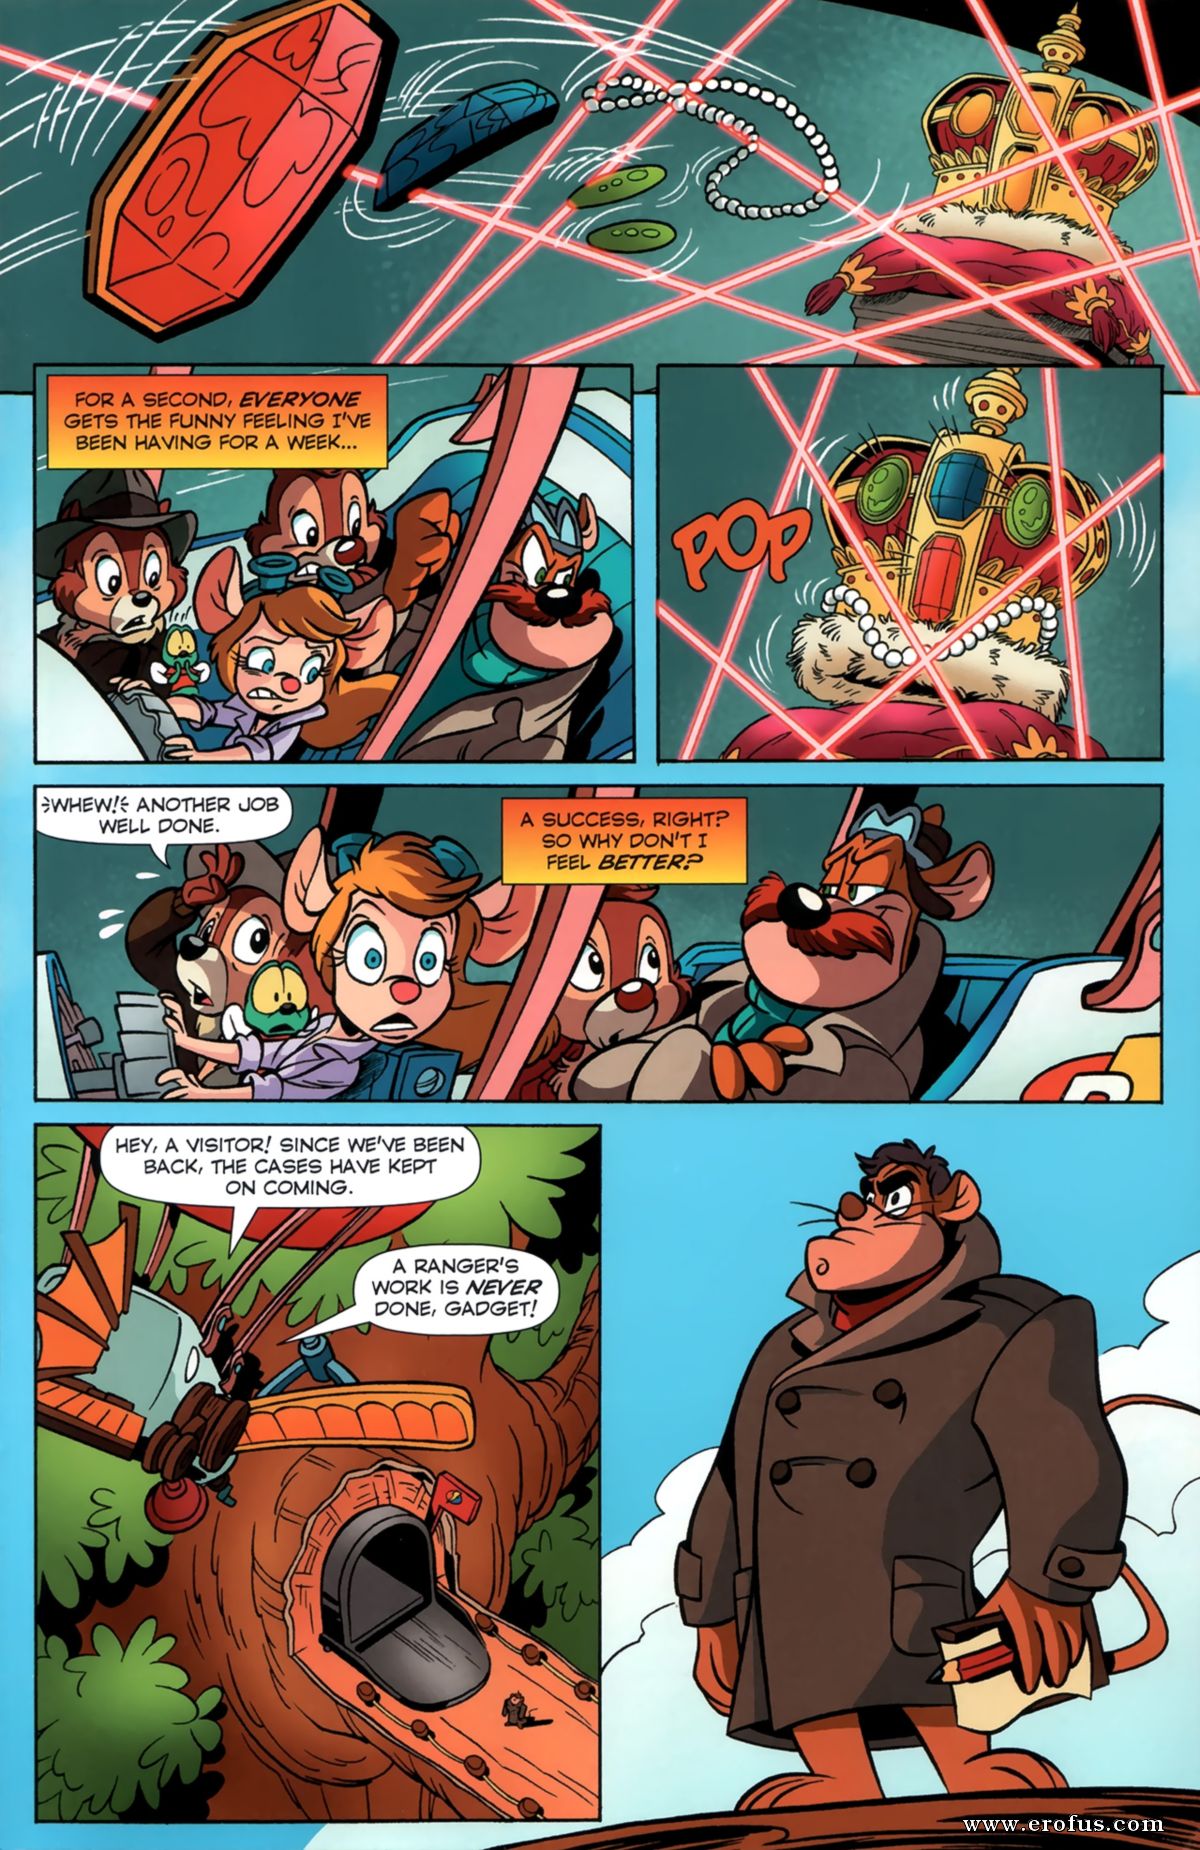 Gadget From Rescue Rangers Porn - Page 8 | theme-collections/chip-n-dale-collection/comics/chipdale-rescue- rangers-2/chip-n-dale-rescue-rangers-6 | Erofus - Sex and Porn Comics